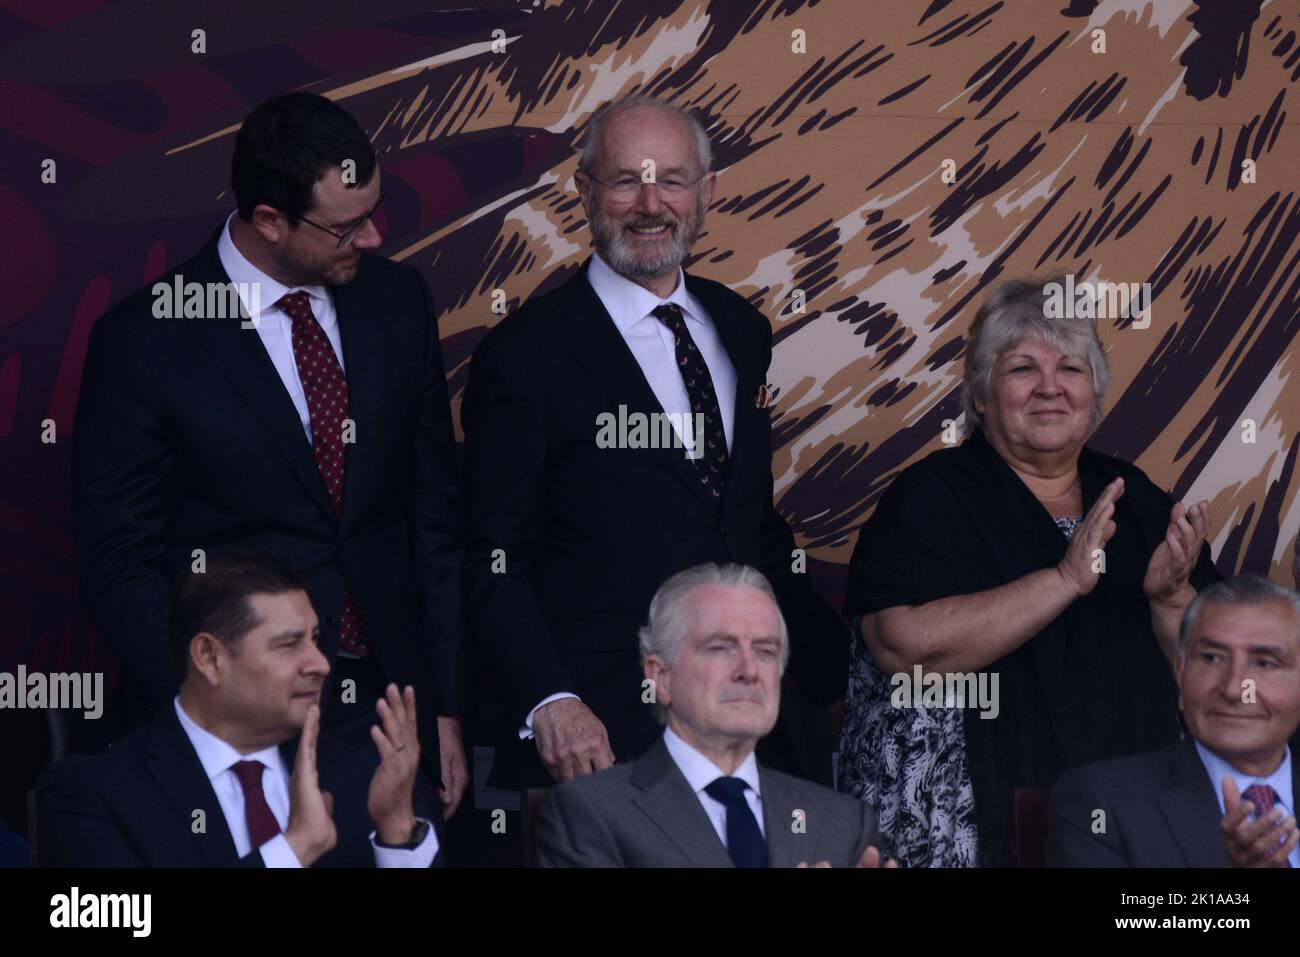 Mexico City, Mexico. 16th Sep, 2022. September 16, 2022, Mexico City, Mexico: John Shipton father of Julian Assange, Gabriel Shipton brother of Julian Assange and Aleida Guevara March, daughter of Ernesto 'Che' Guevara during the ceremony of the civic-military parade as part of the commemoration of the 212th Anniversary of the beginning of Mexico's Independence in the downtown. on September 16, 2022 in Mexico City, Mexico. (Photo by Carlos Tischler/ Eyepix Group/Sipa USA) Credit: Sipa USA/Alamy Live News Stock Photo